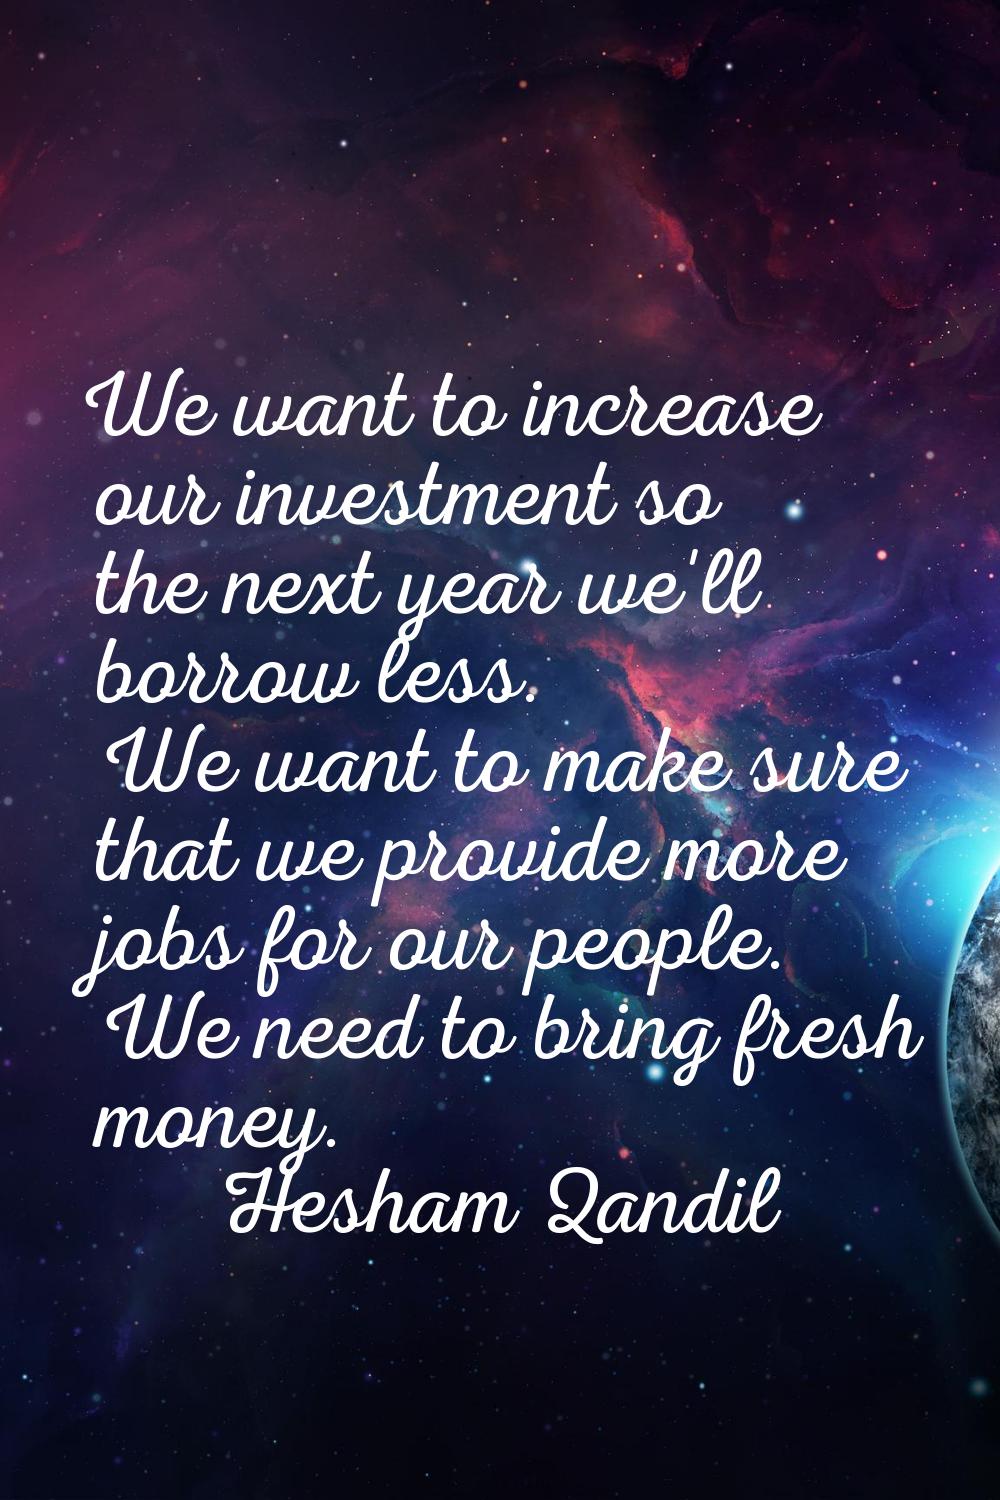 We want to increase our investment so the next year we'll borrow less. We want to make sure that we